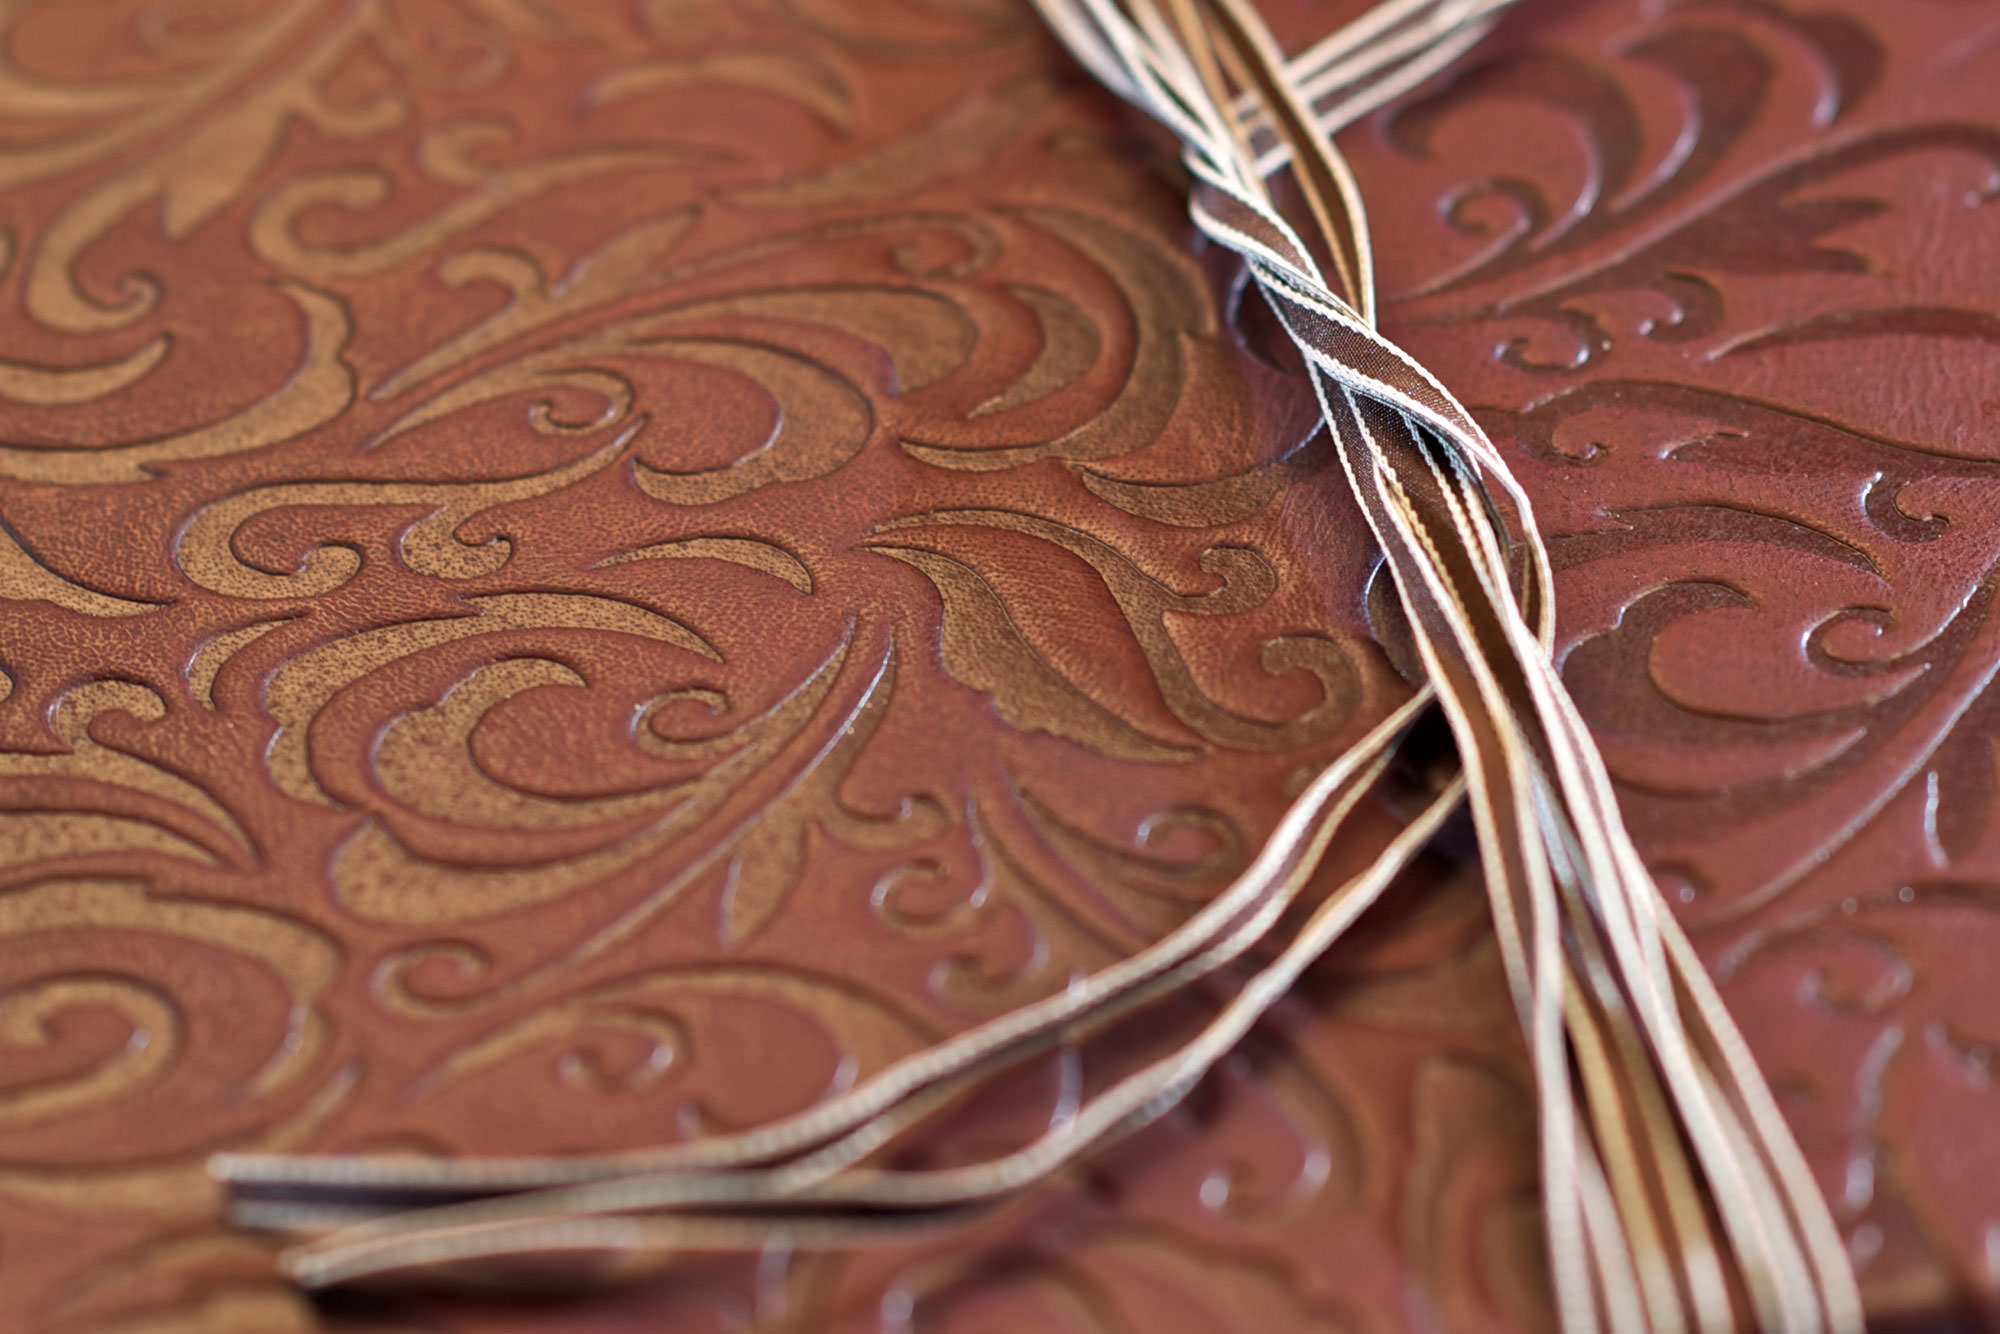 Musée by Queensberry Leather cover details